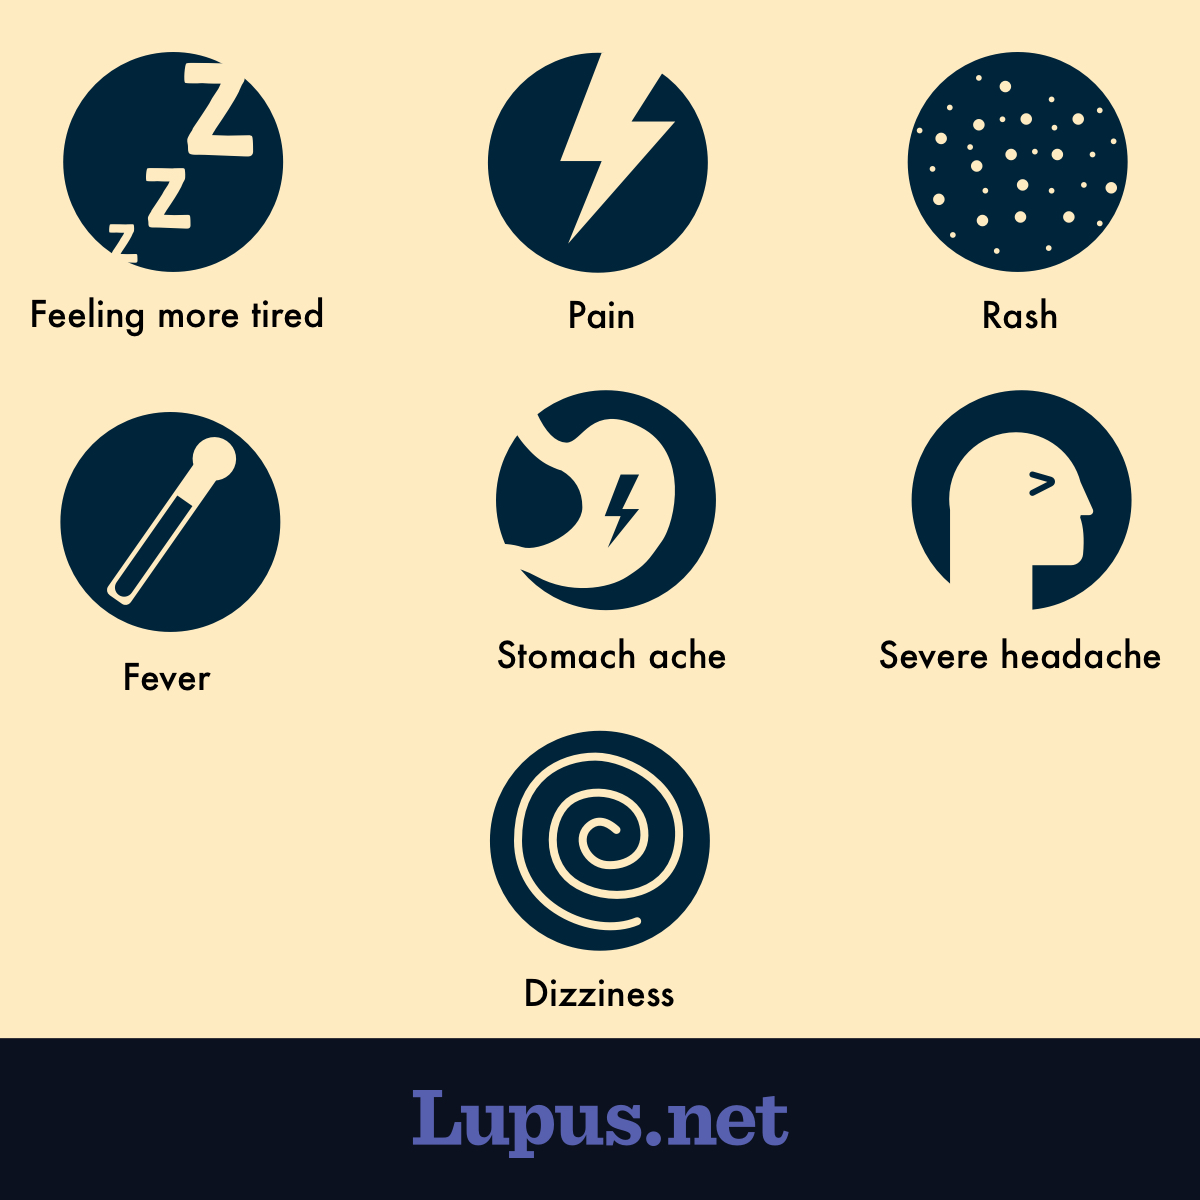 Image showing signs that a lupus flare is coming. Includes icons to illustrate feeling more tired, pain, rash, fever, stomach ache, severe headache, and dizziness.